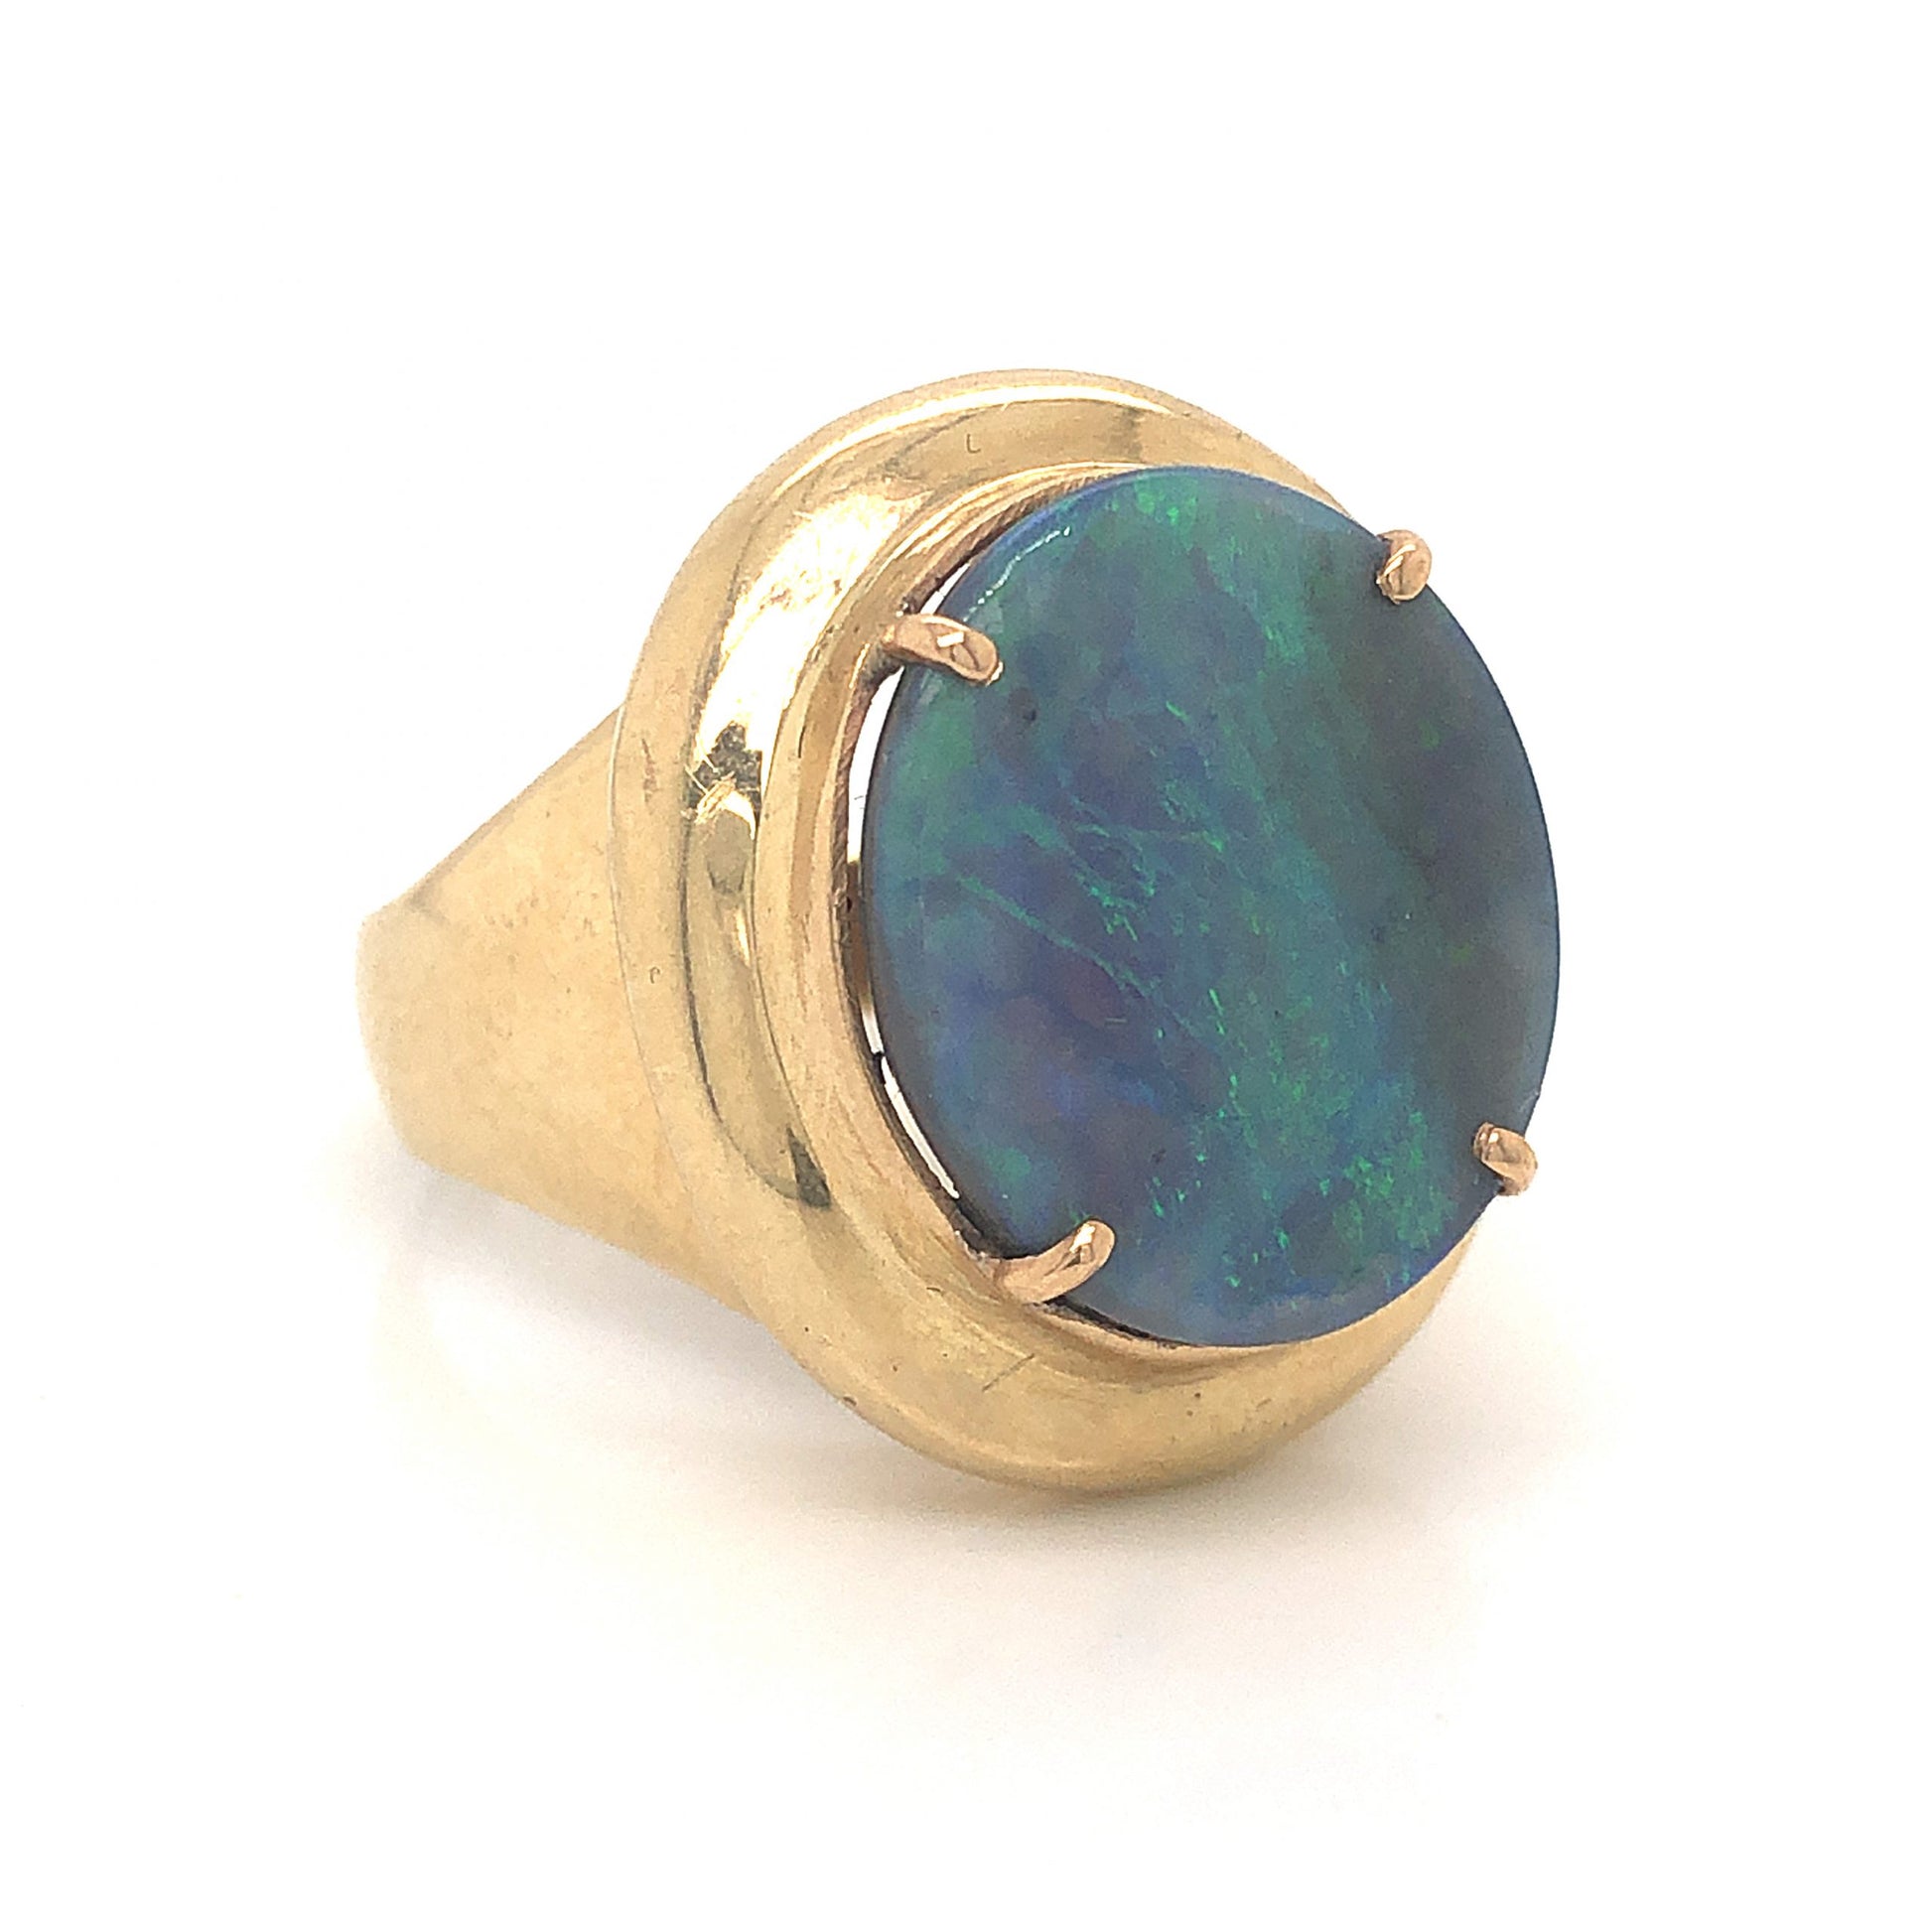 Mid-Century Opal Tablet Cocktail Ring in 14k Yellow GoldComposition: 14 Karat Yellow GoldRing Size: 10Total Gram Weight: 14.2 gInscription: 14k 